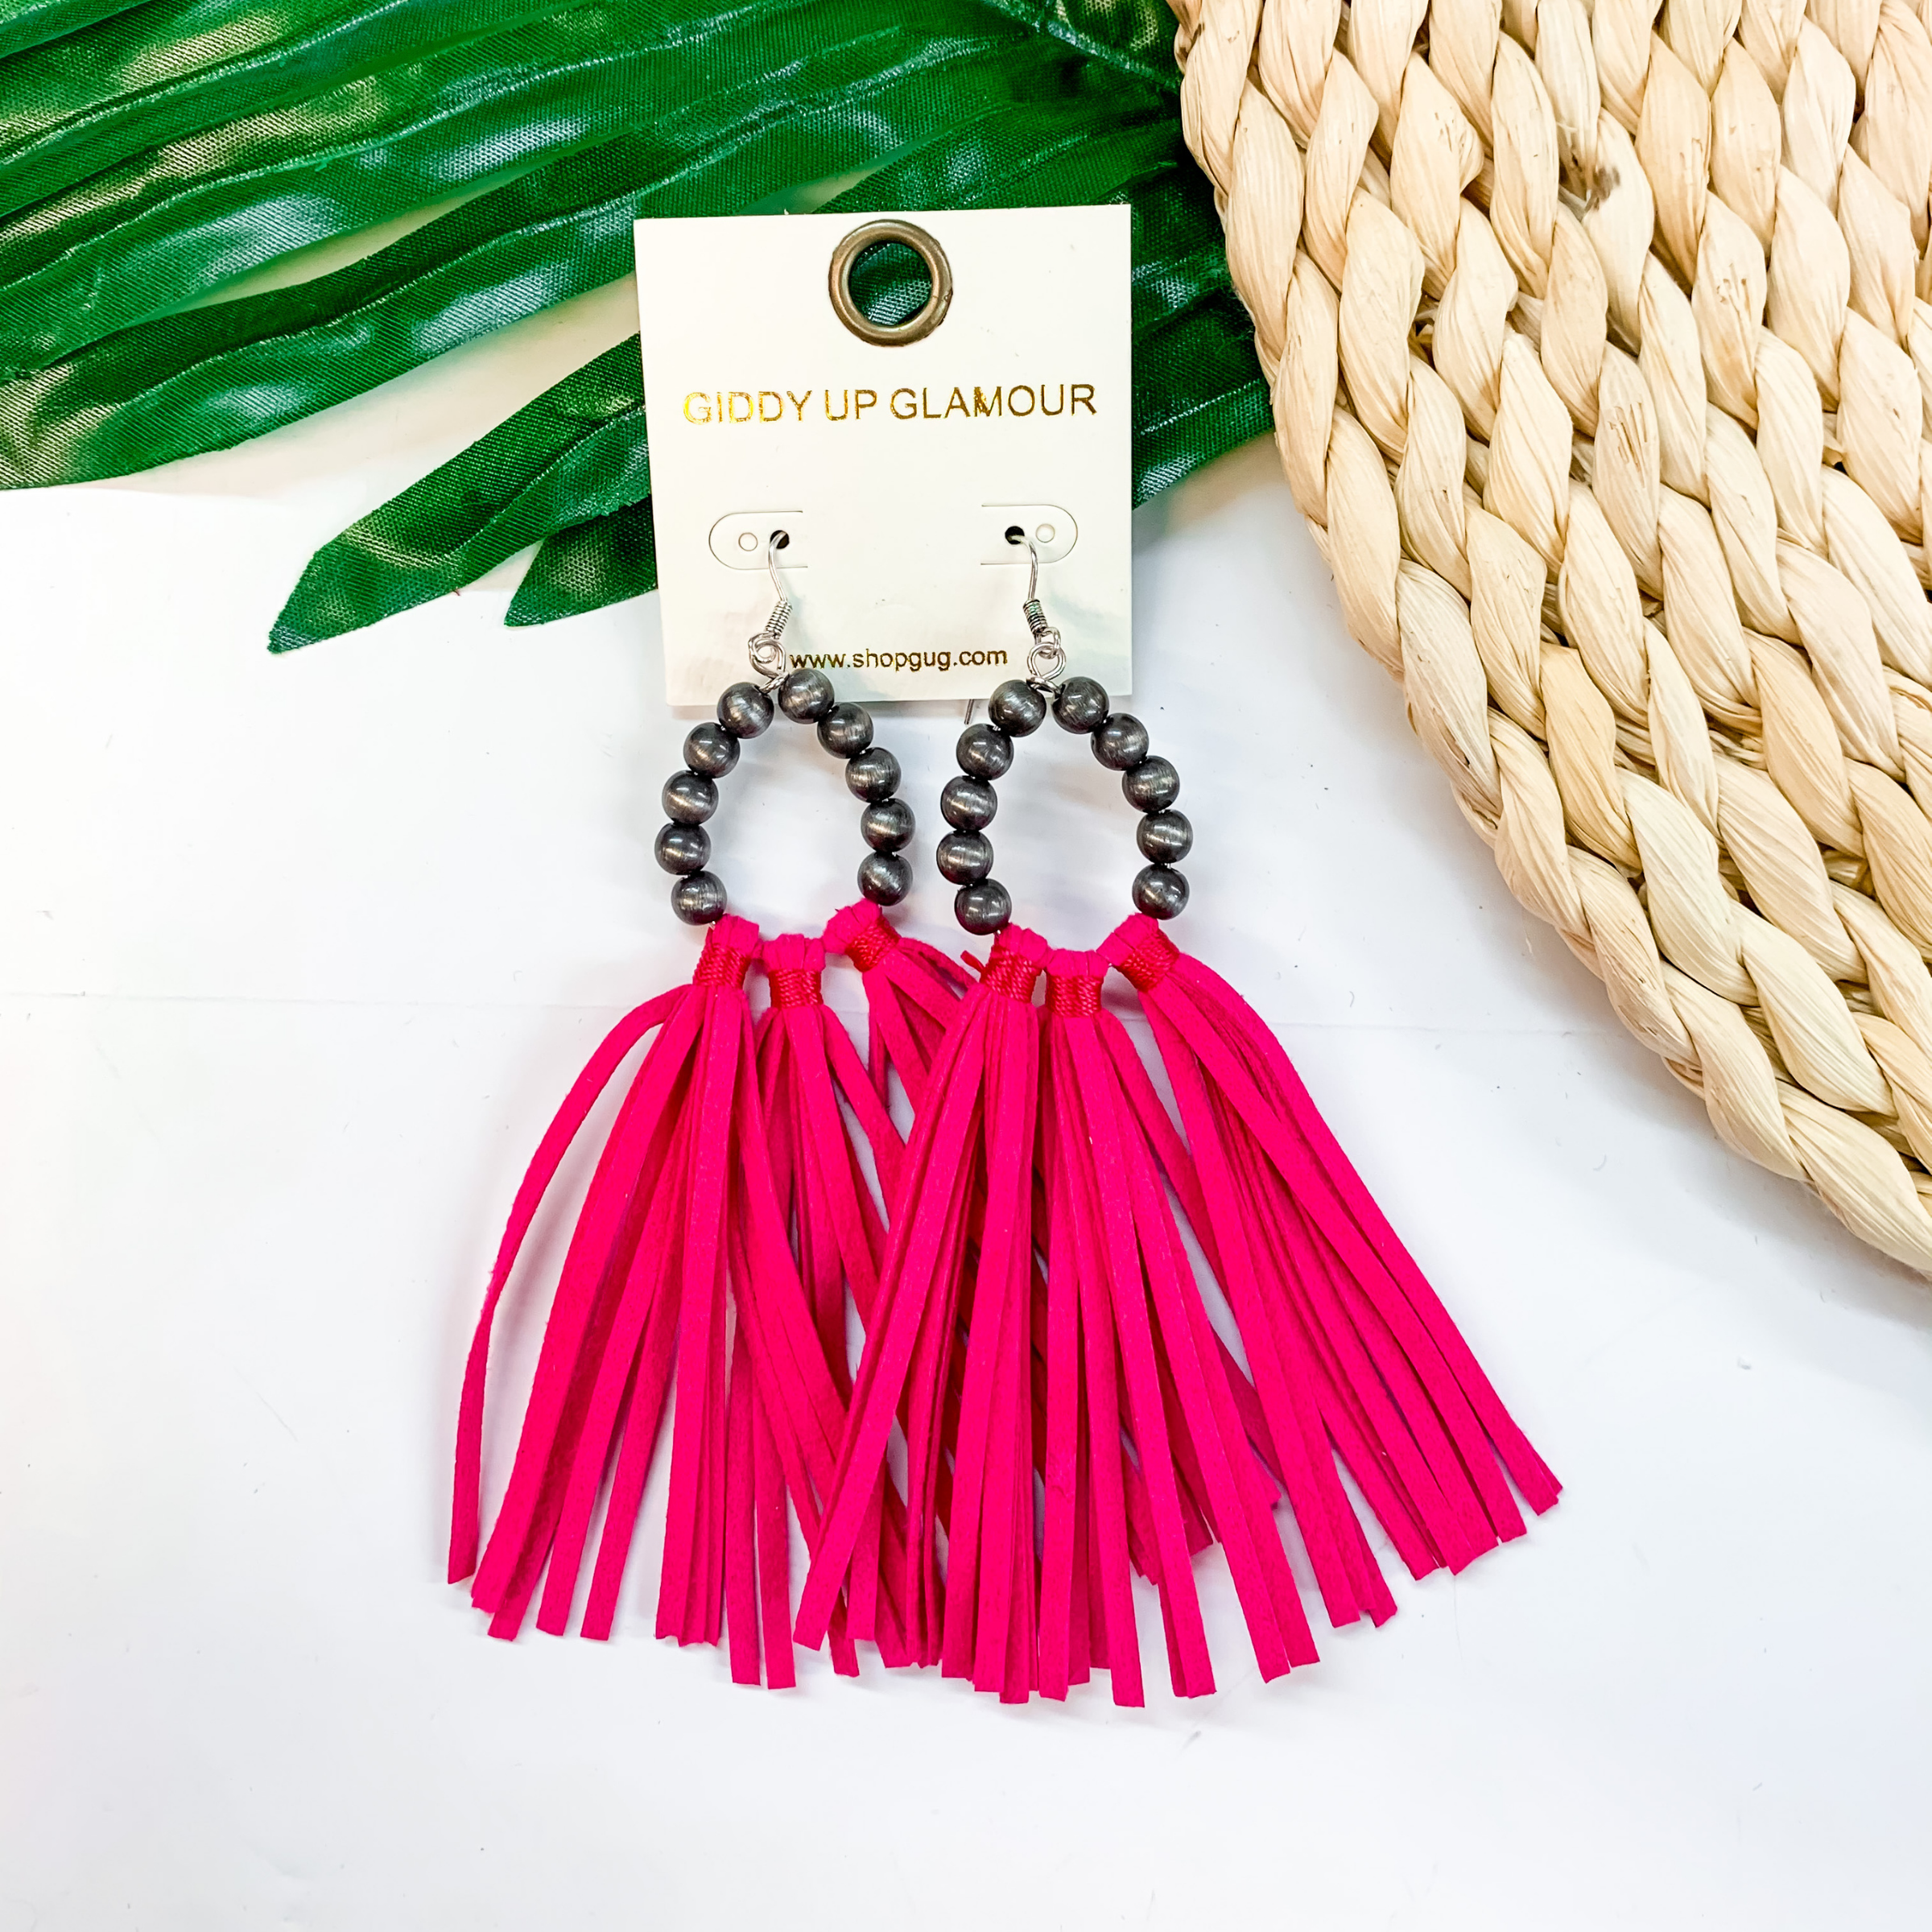 A pair of faux Navajo pearl earrings with hot pink tassels. These earrings are pictured on a white background with a basket and a green palm leaf.